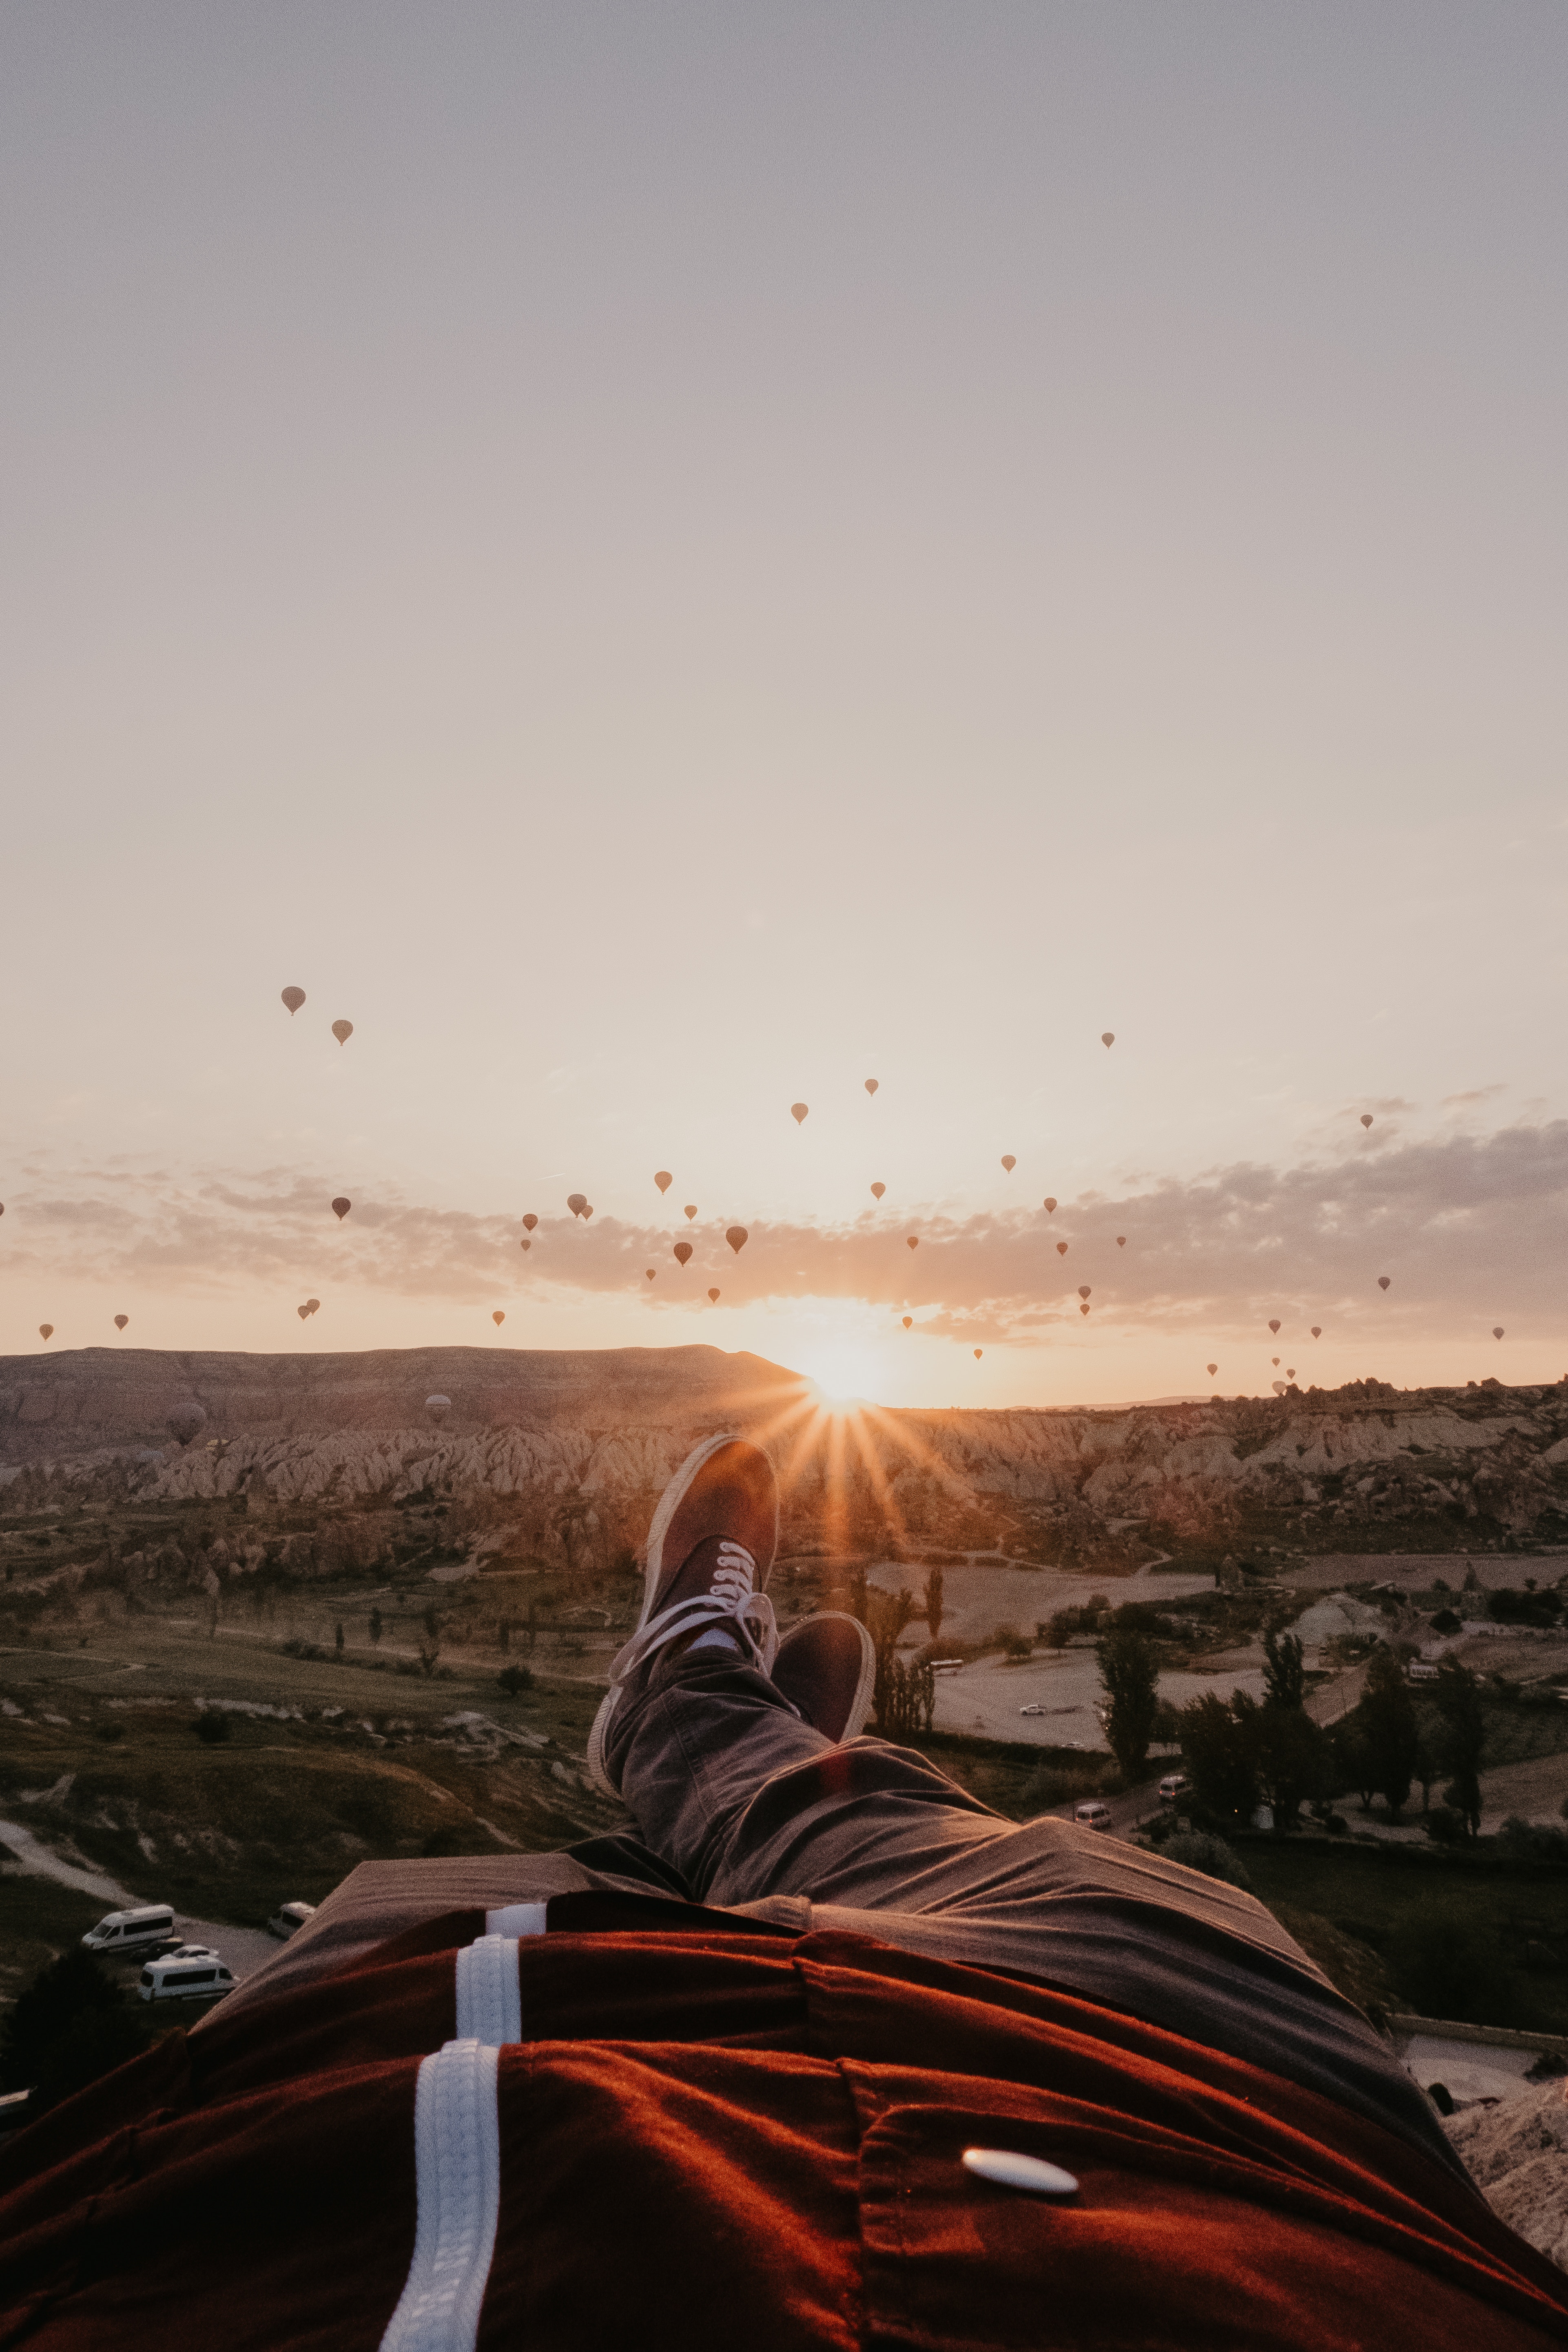 Cool Backgrounds nature, landscape, rest, balloons Relaxation